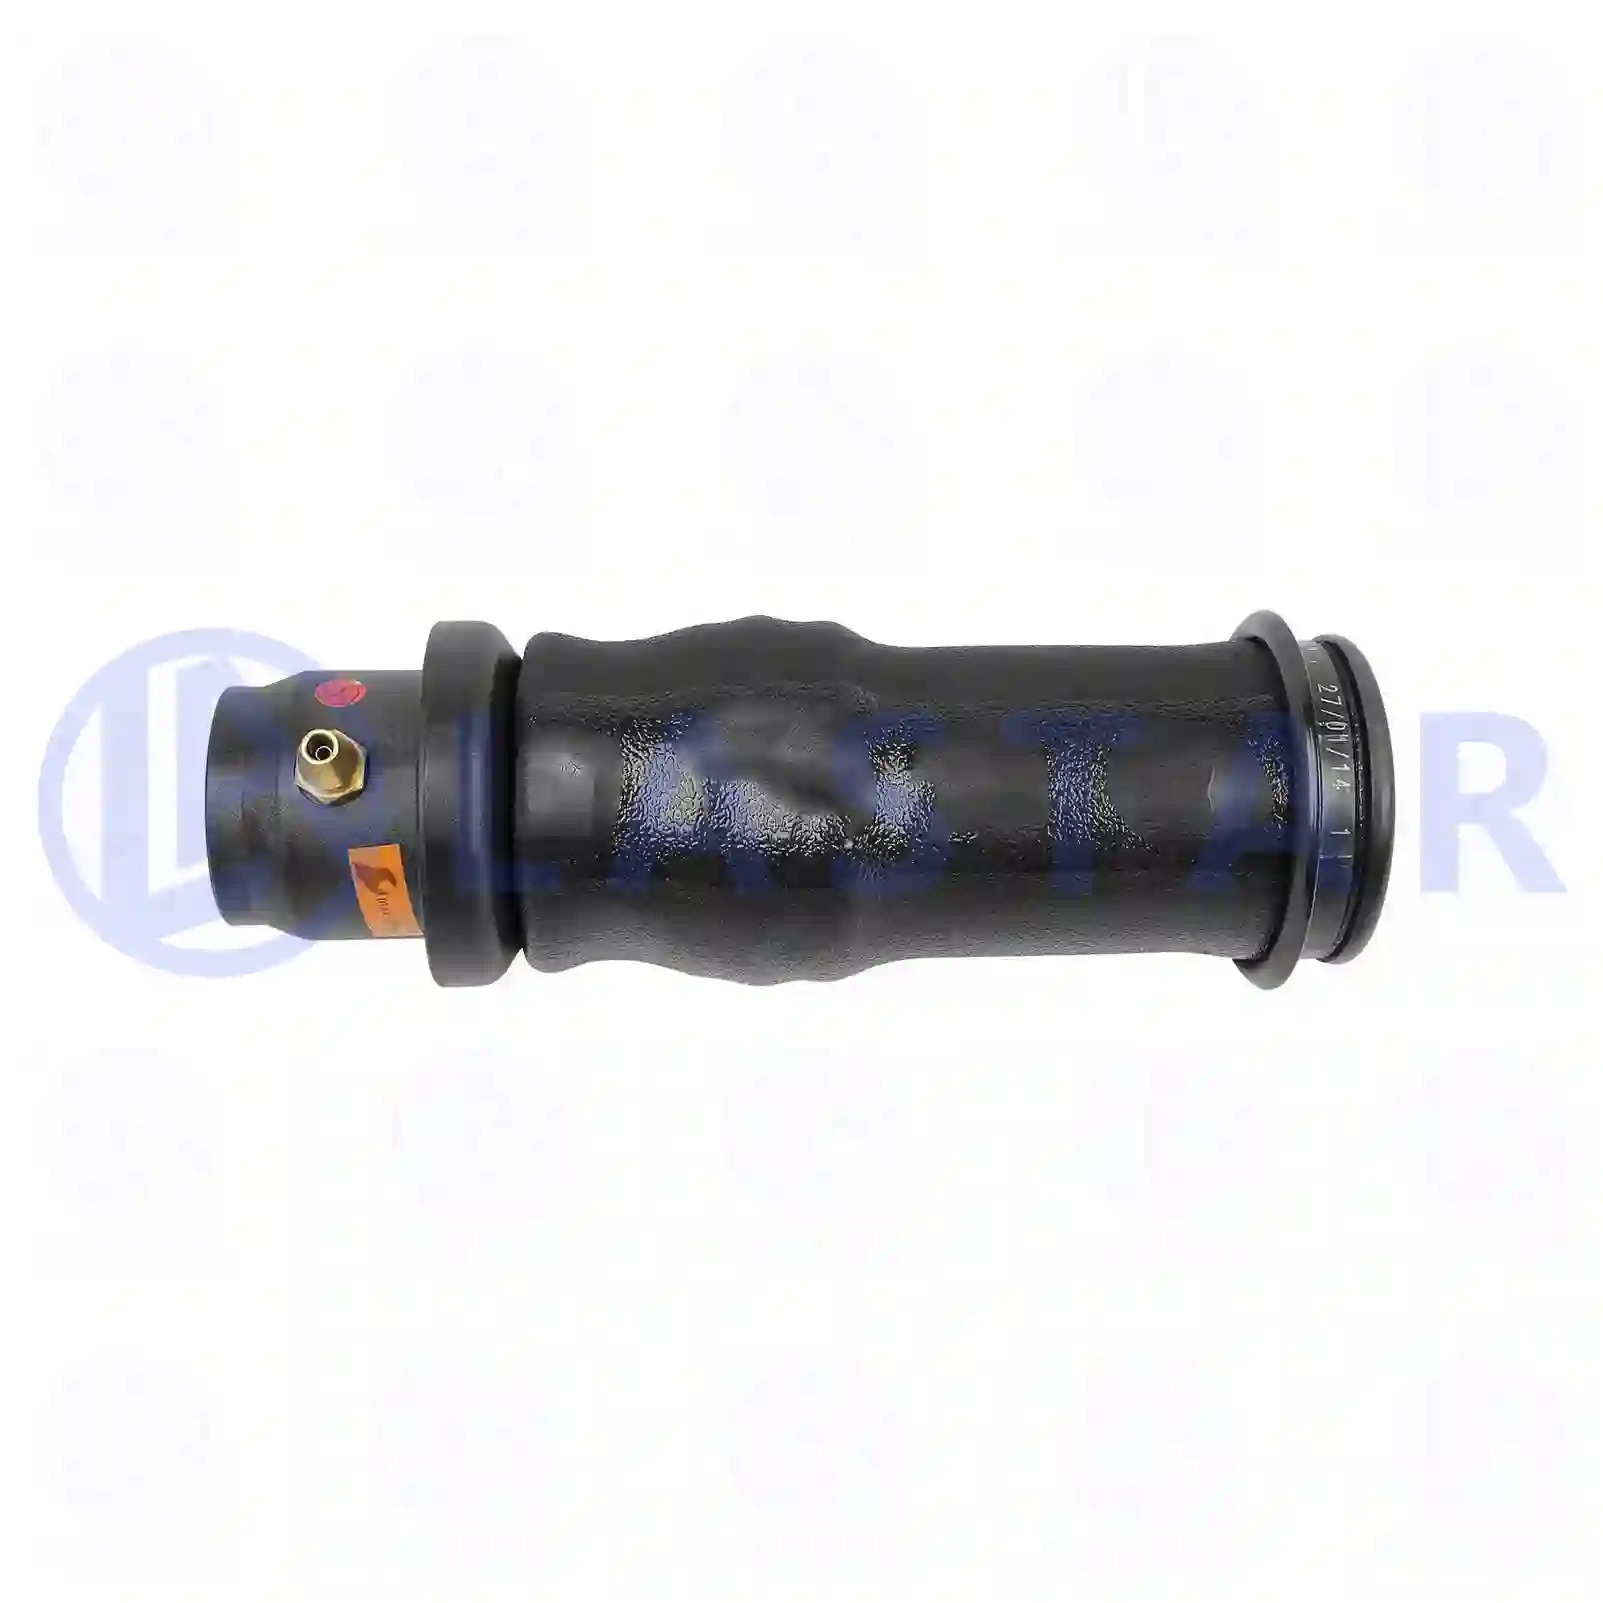 Air bellow, cabin shock absorber, 77735949, 1348121 ||  77735949 Lastar Spare Part | Truck Spare Parts, Auotomotive Spare Parts Air bellow, cabin shock absorber, 77735949, 1348121 ||  77735949 Lastar Spare Part | Truck Spare Parts, Auotomotive Spare Parts